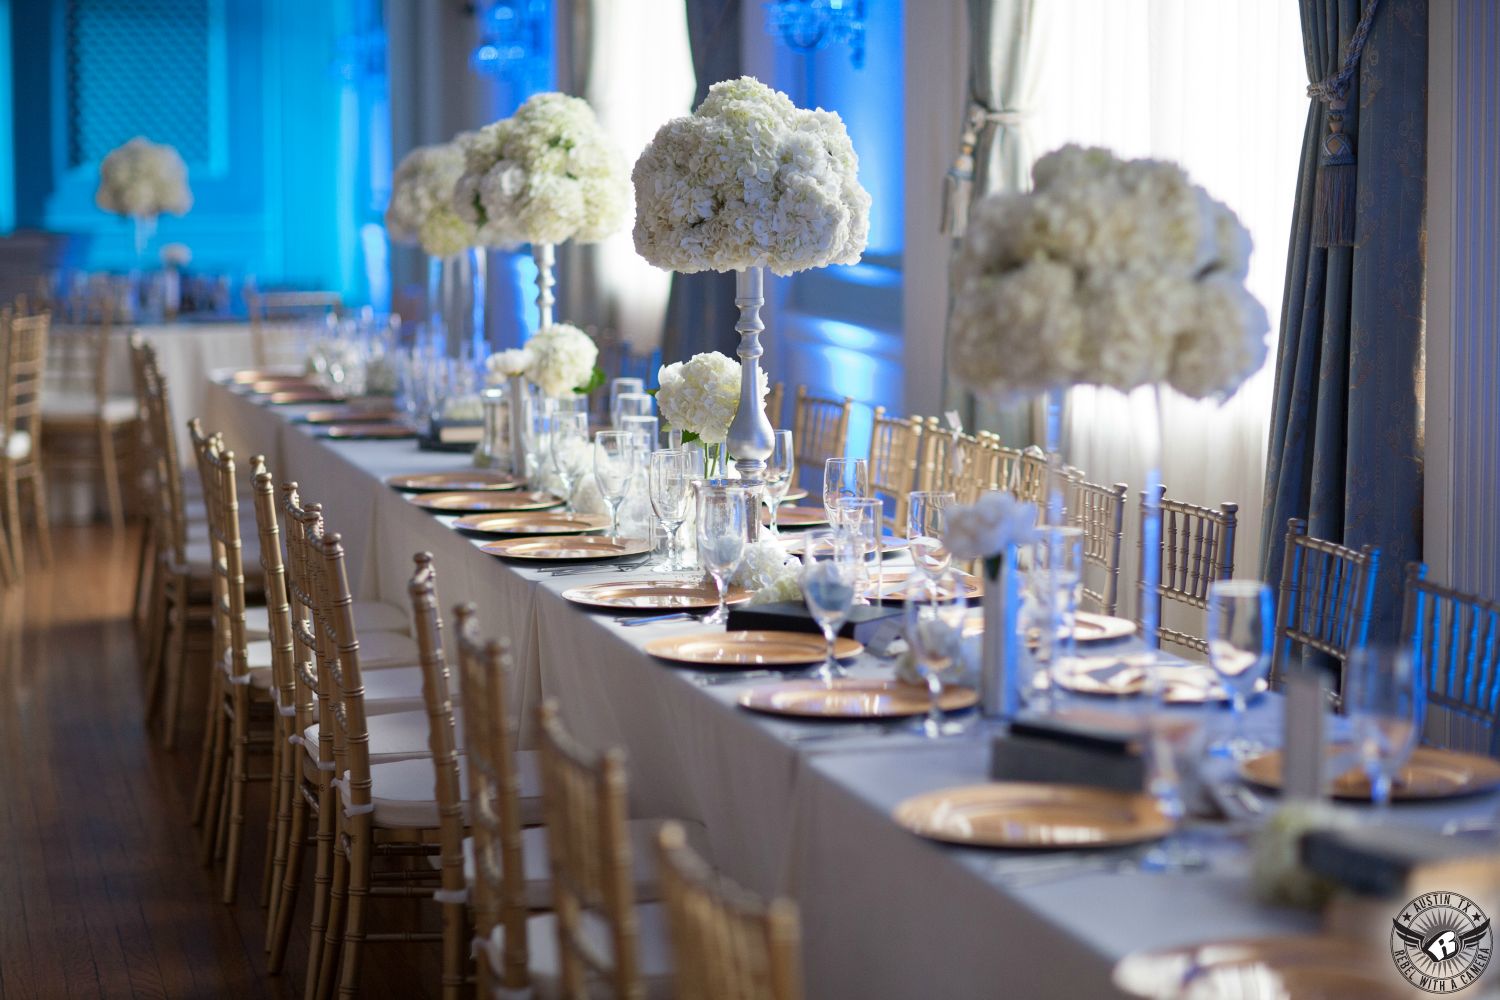 Stunningly decorated wedding reception with gold chiavari chairs, white hydrangeas in silver vases, and gold chargers with blue uplighting in the ballroom at the Texas Federation of Women's Clubs Mansion Headquarters decor by Clearly Classy Events and Wild Poppy florist Austin wedding vendors.